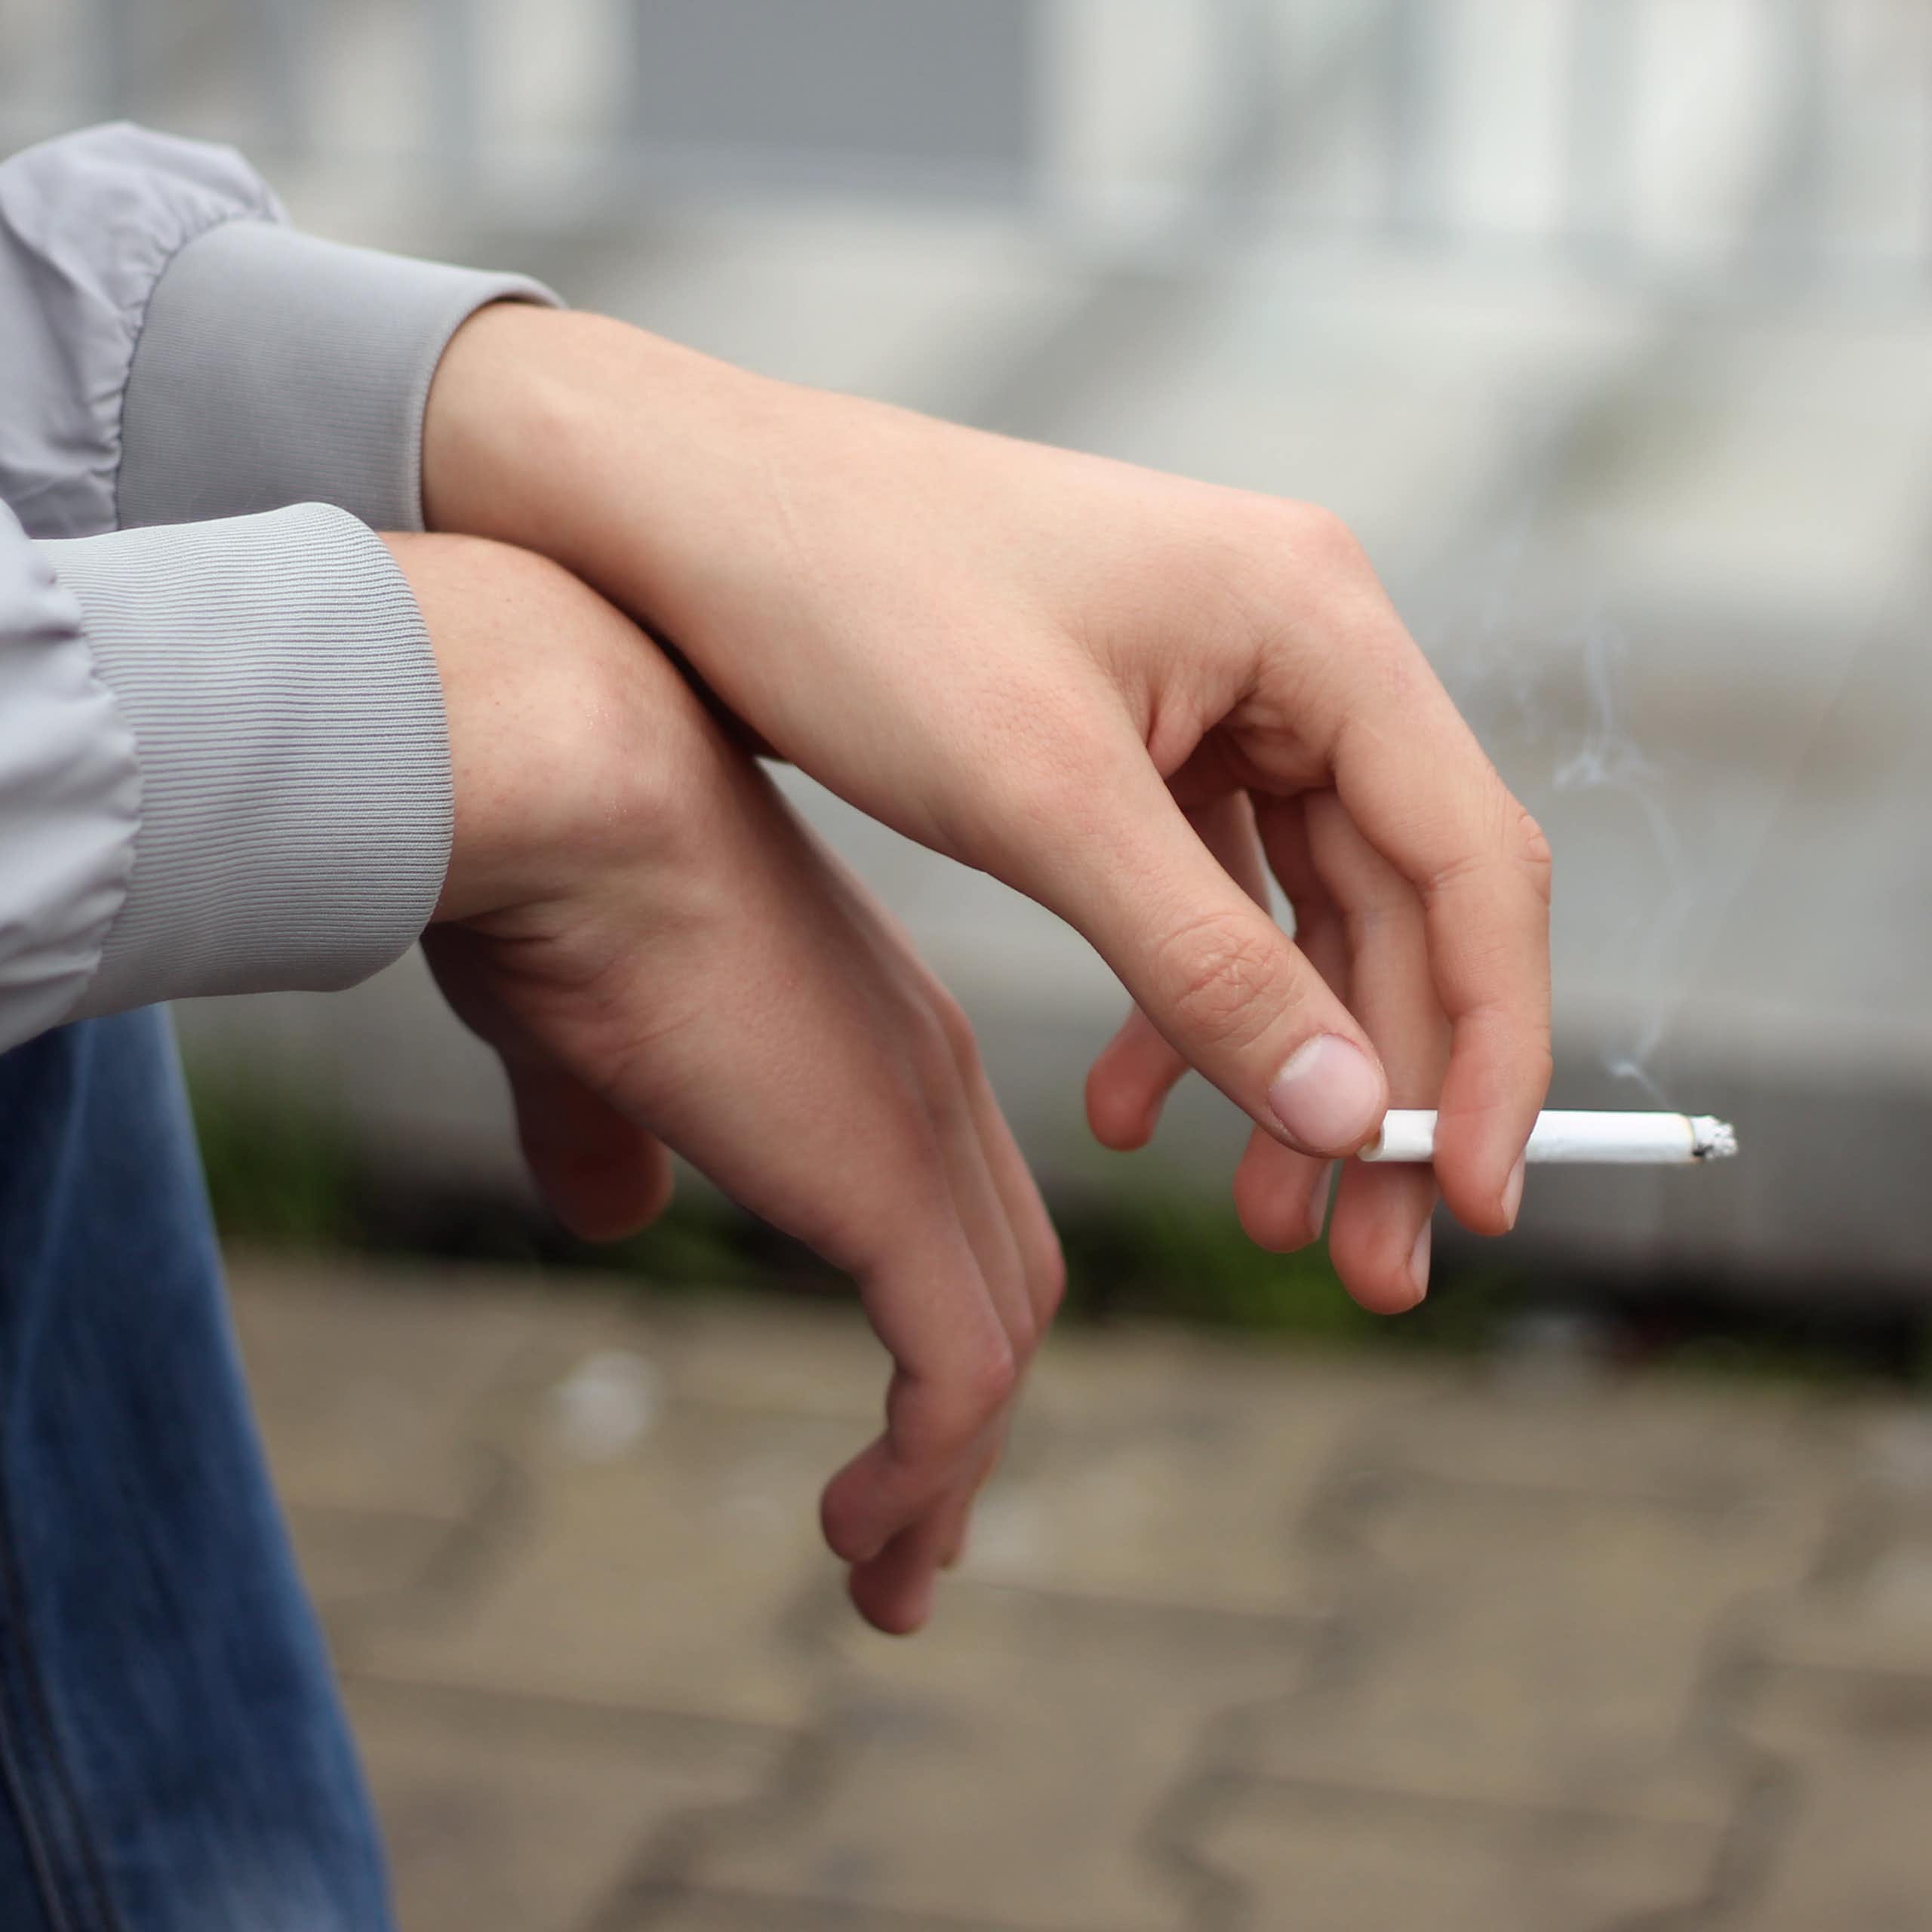 A person holds a lit cigarette in their hand.